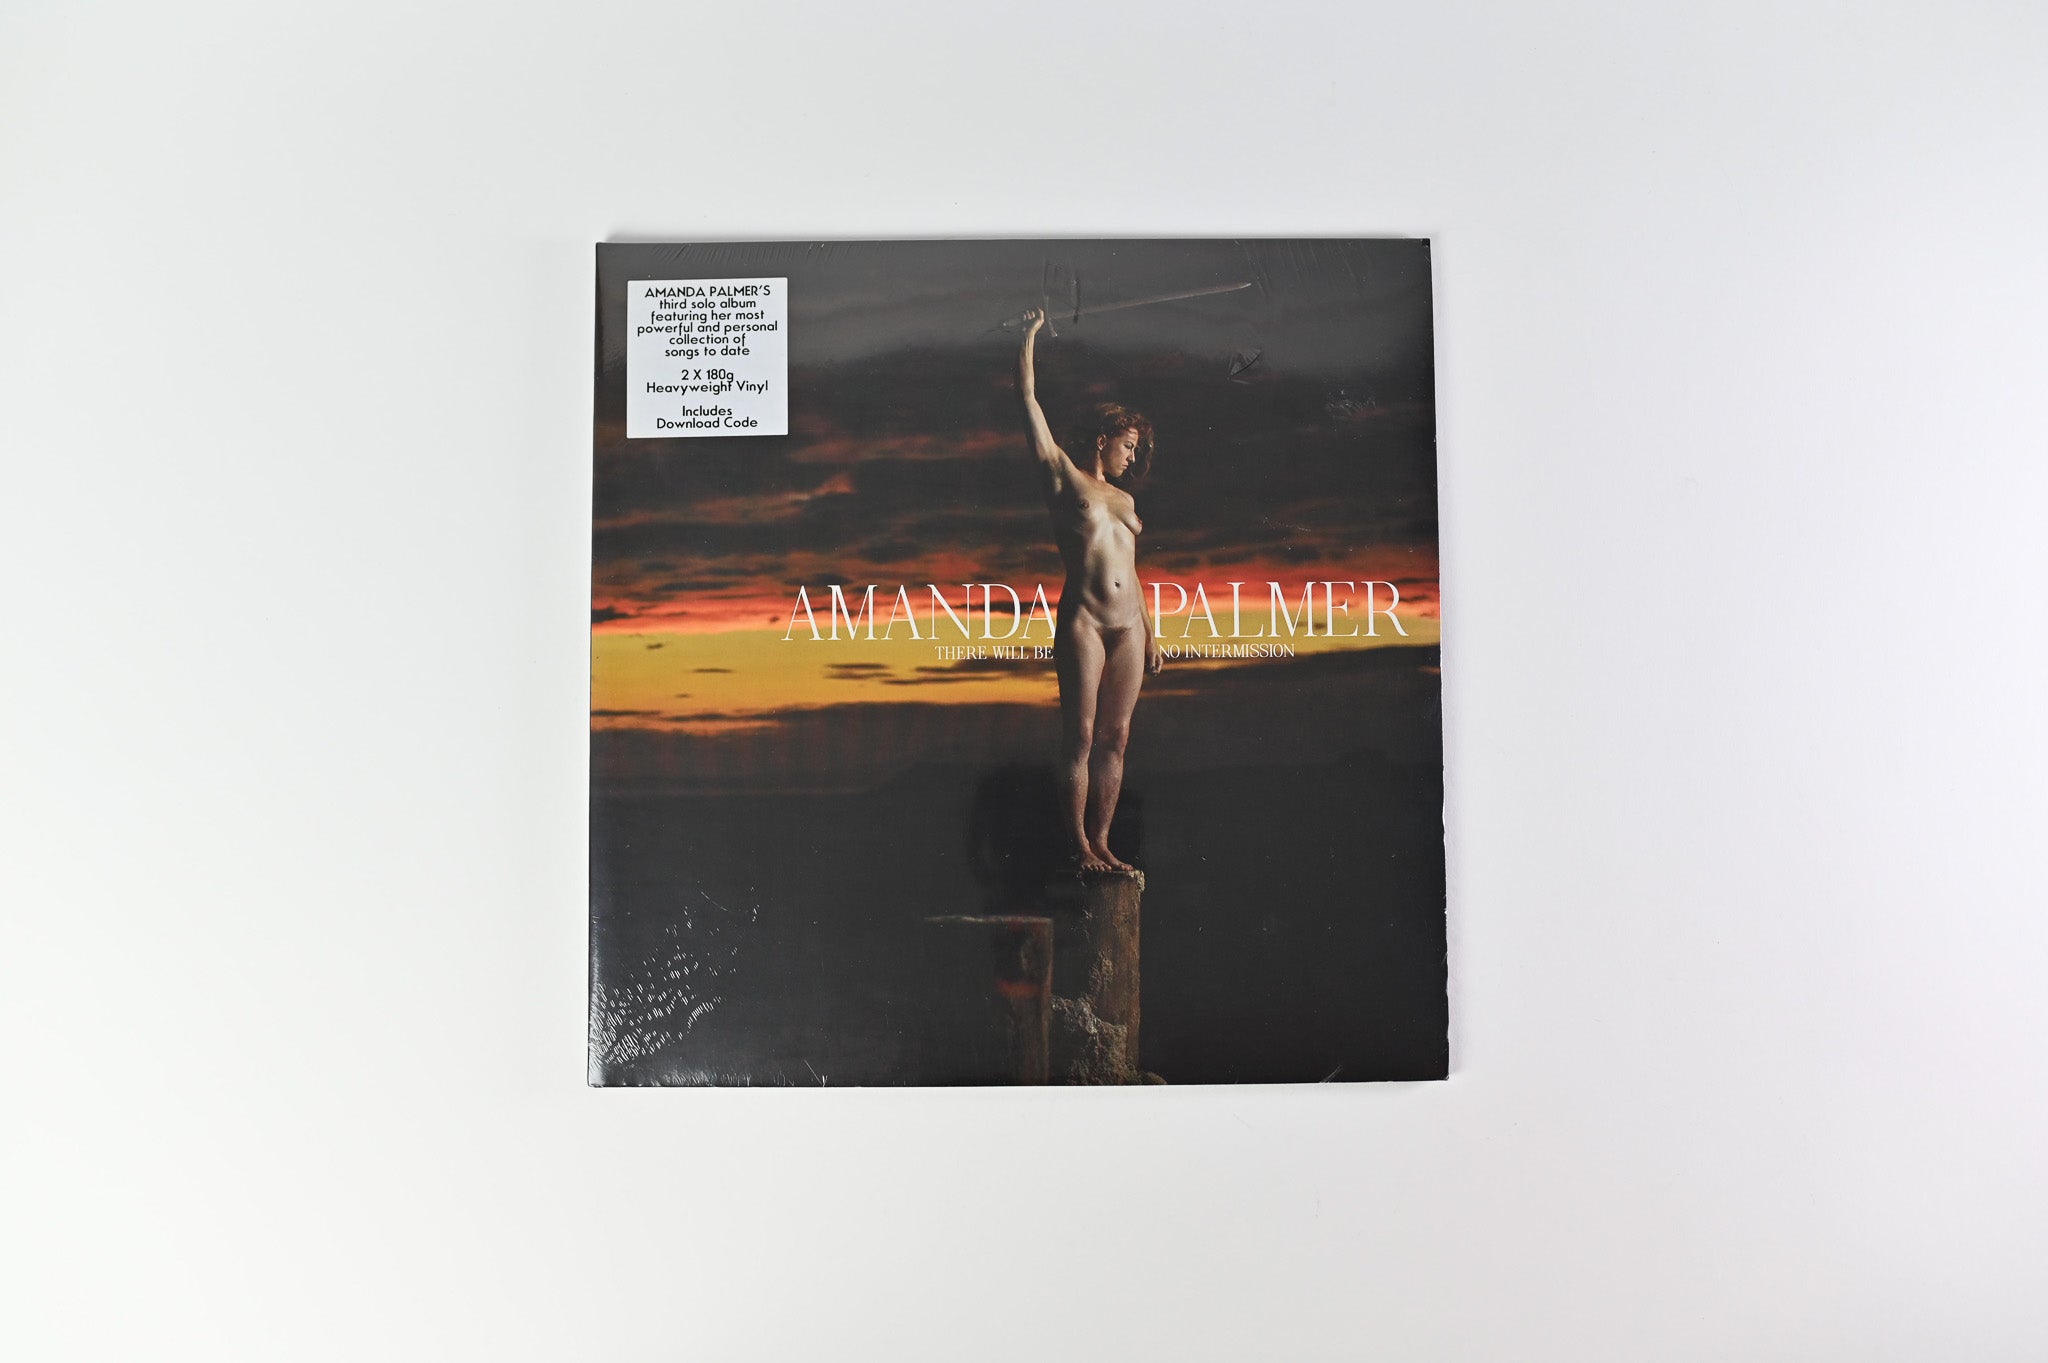 Amanda Palmer - There Will Be No Intermission on 8ft. Records / Cooking Vinyl